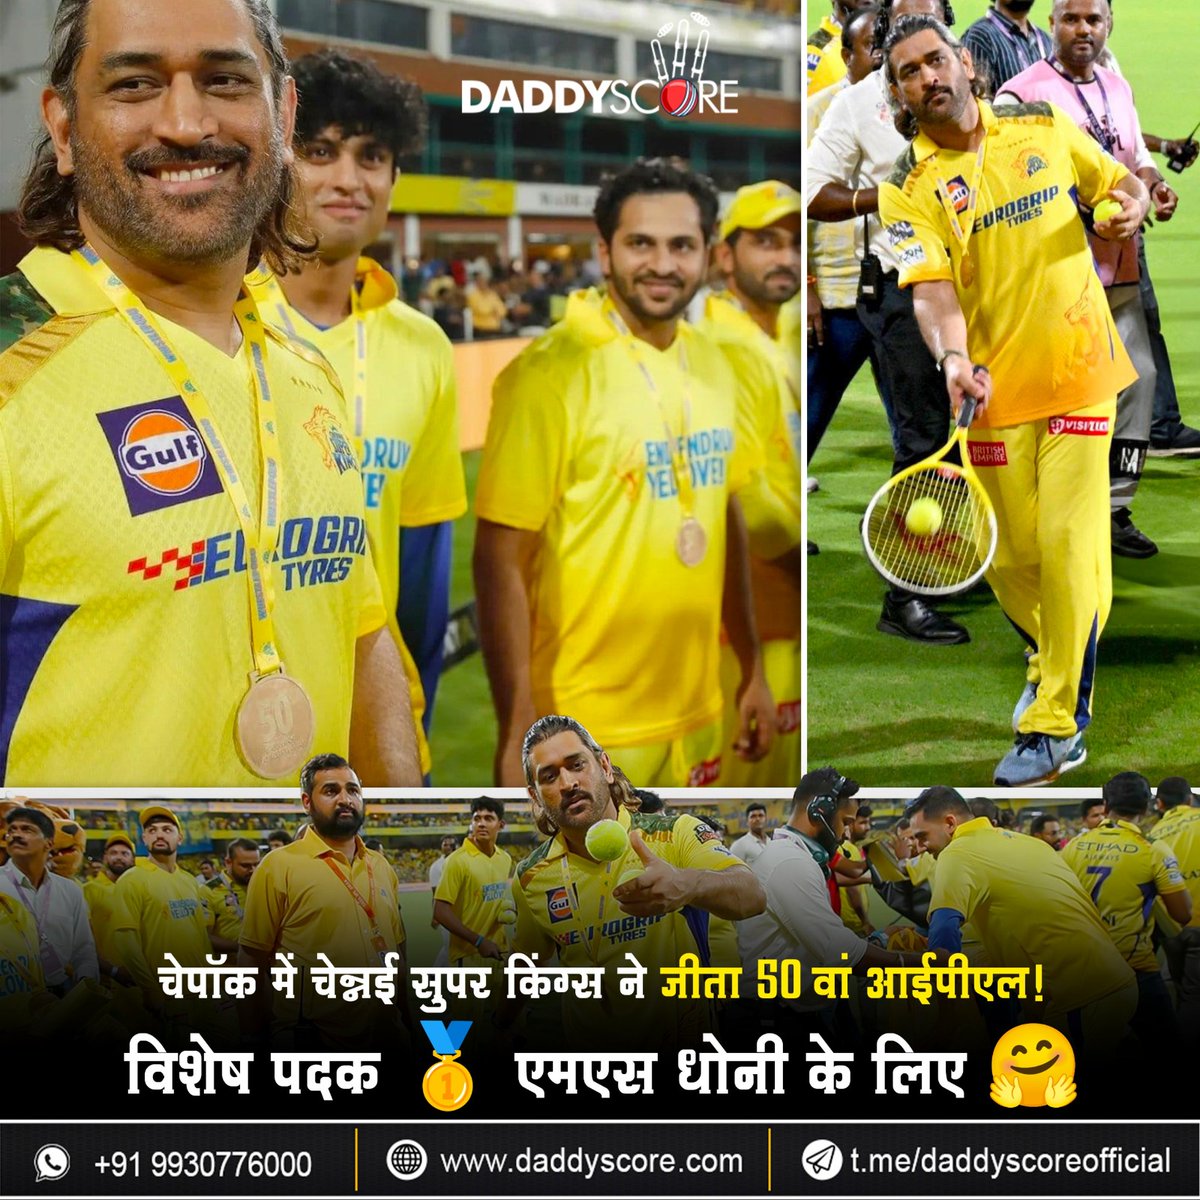 Chennai Super Kings won the 50th IPL in Chepauk! Special medal 🥇 for MS Dhoni 🤗